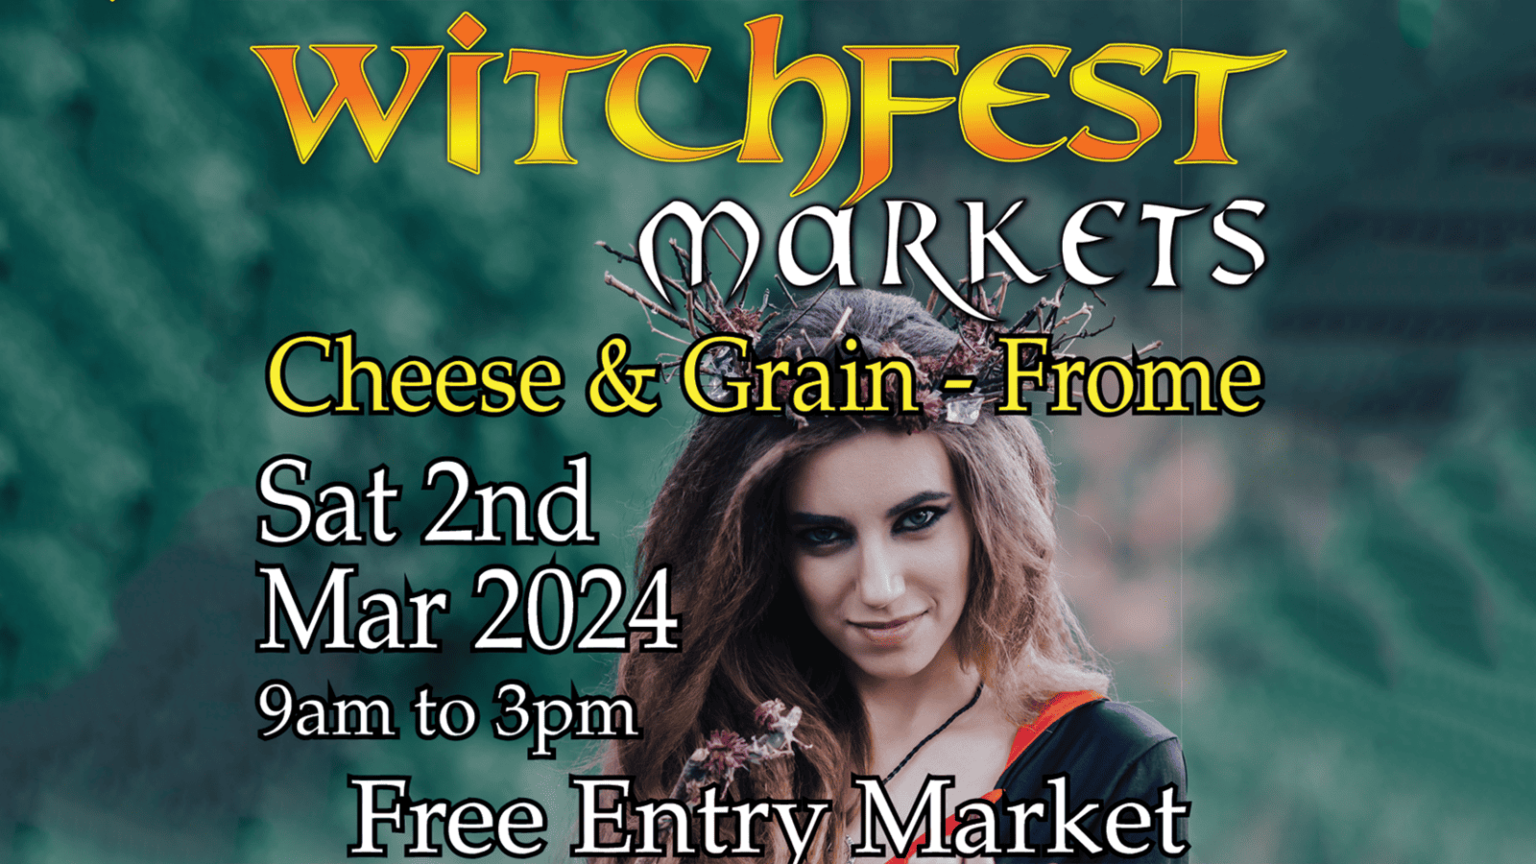 Witchfest Market Frome 2024 Cheese & Grain